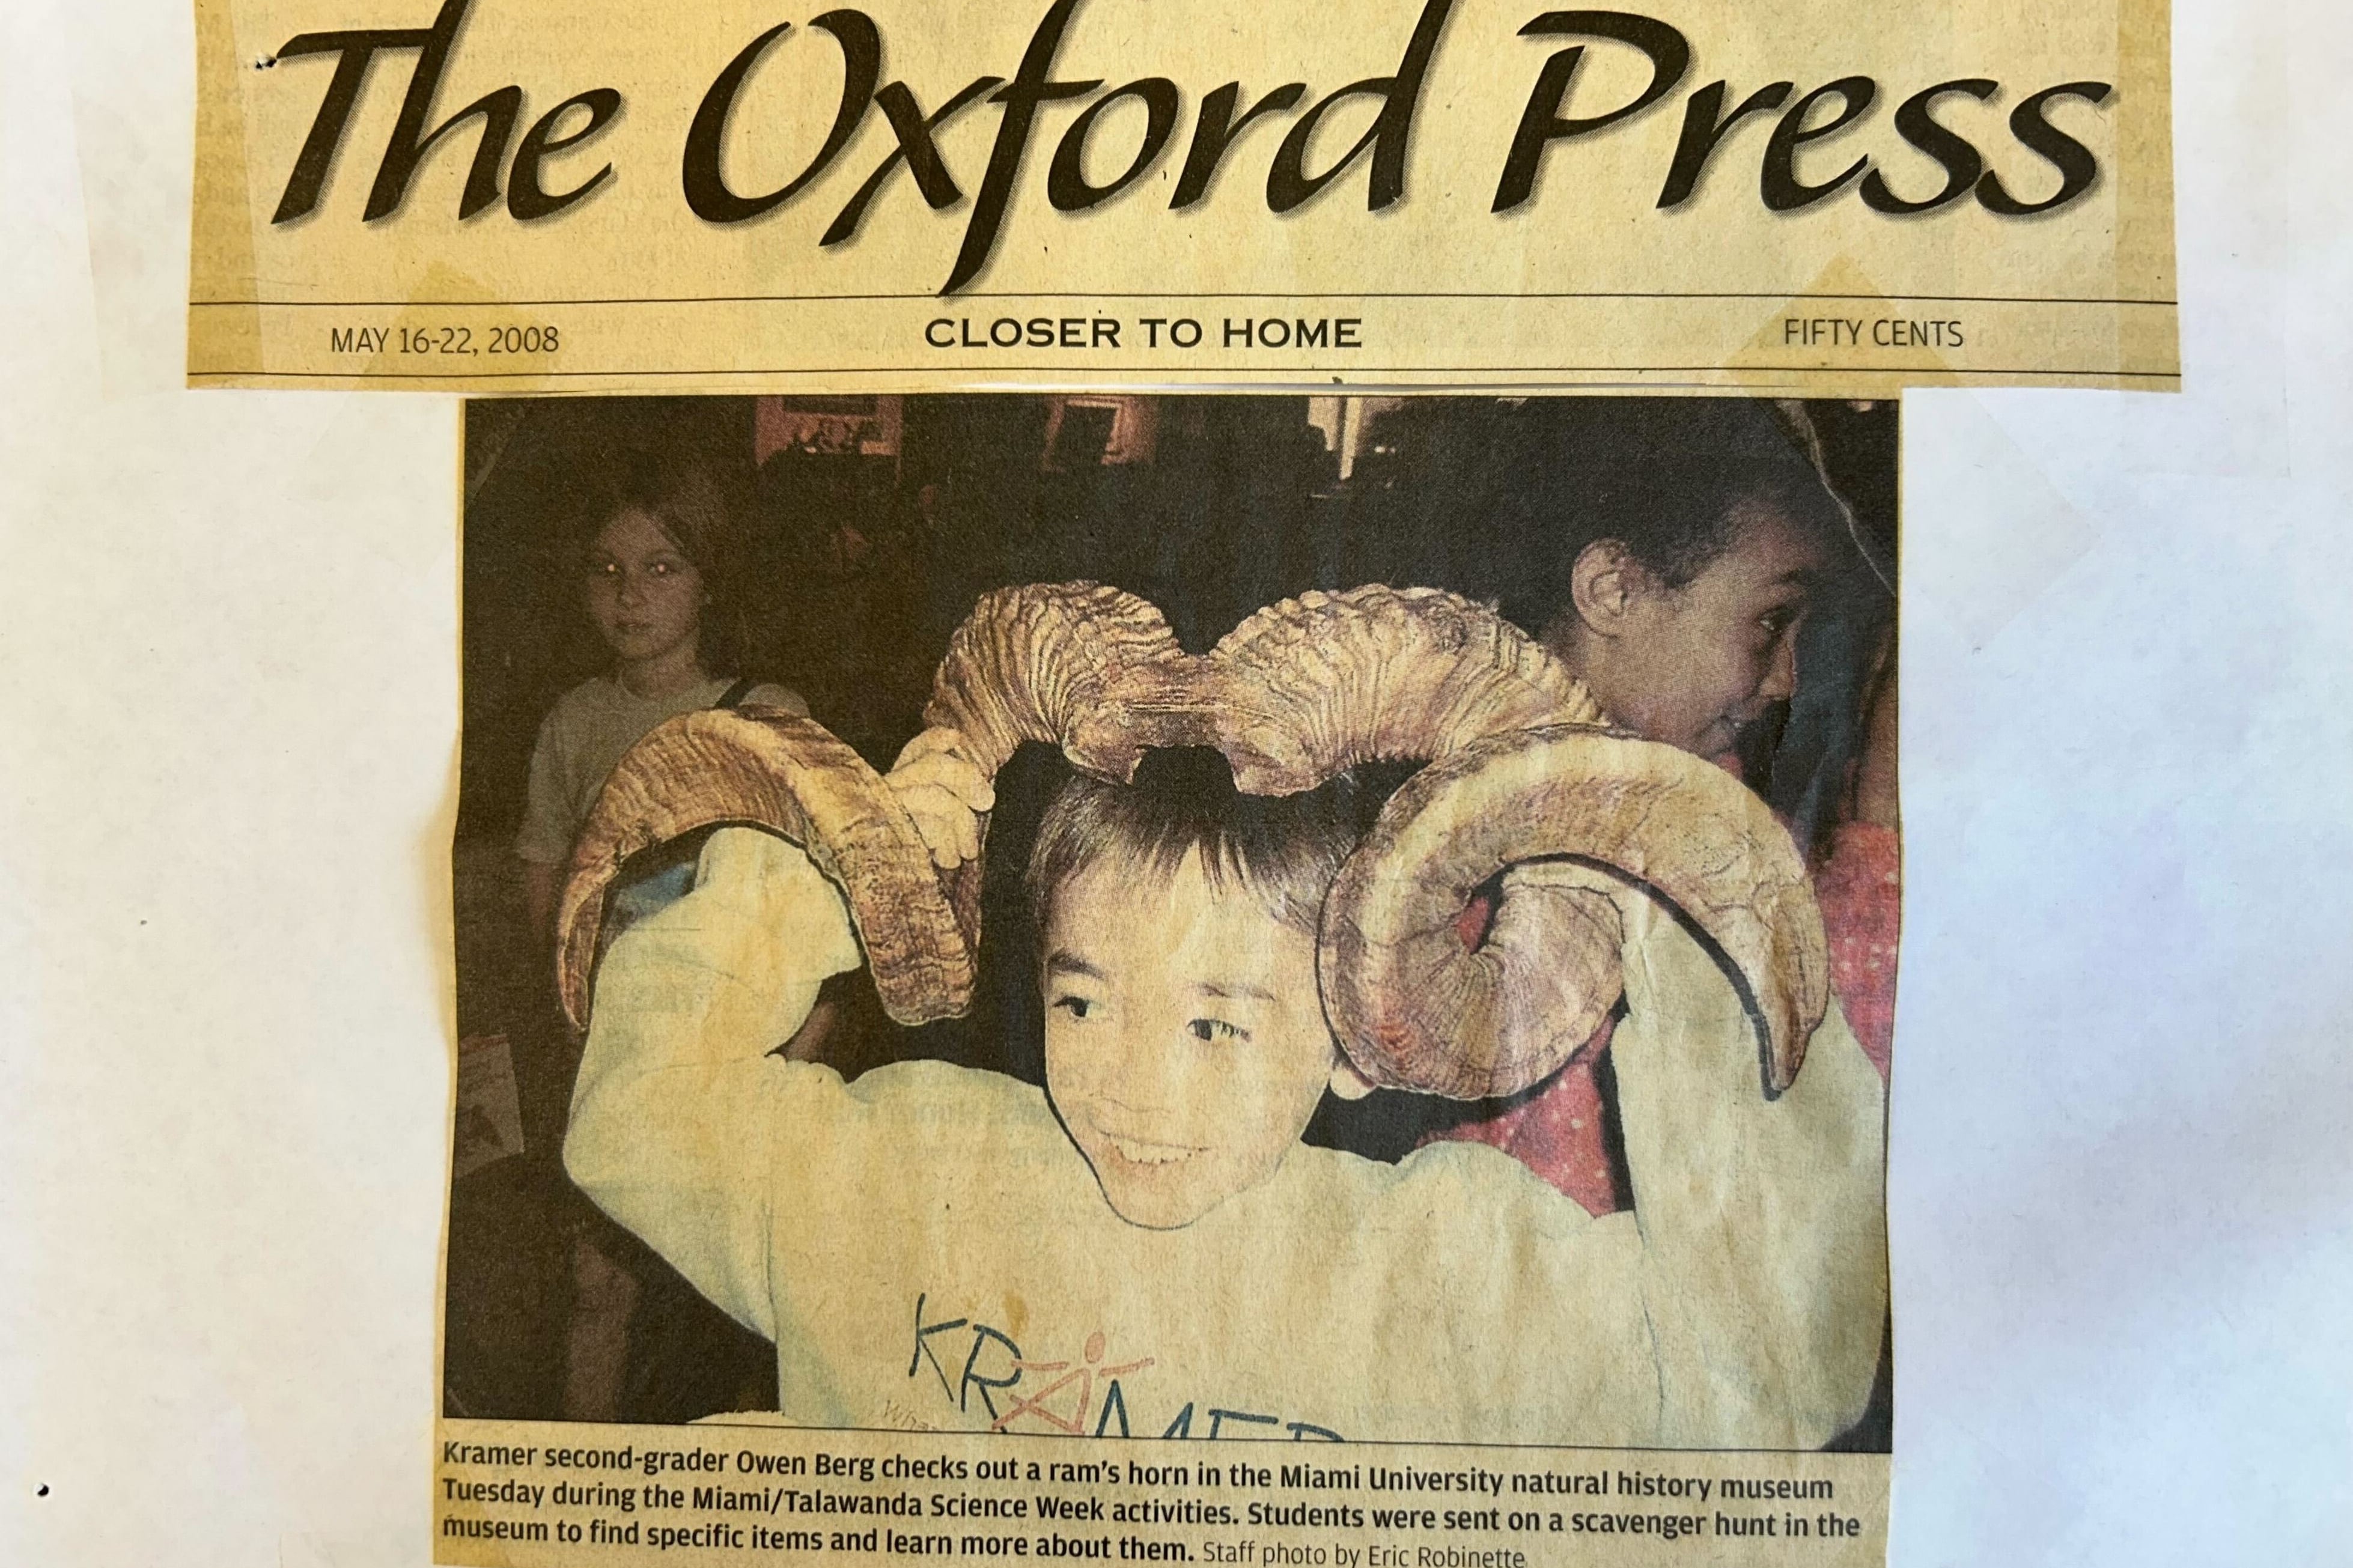 Owen Berg on the front page of The Oxford Press in 2008.